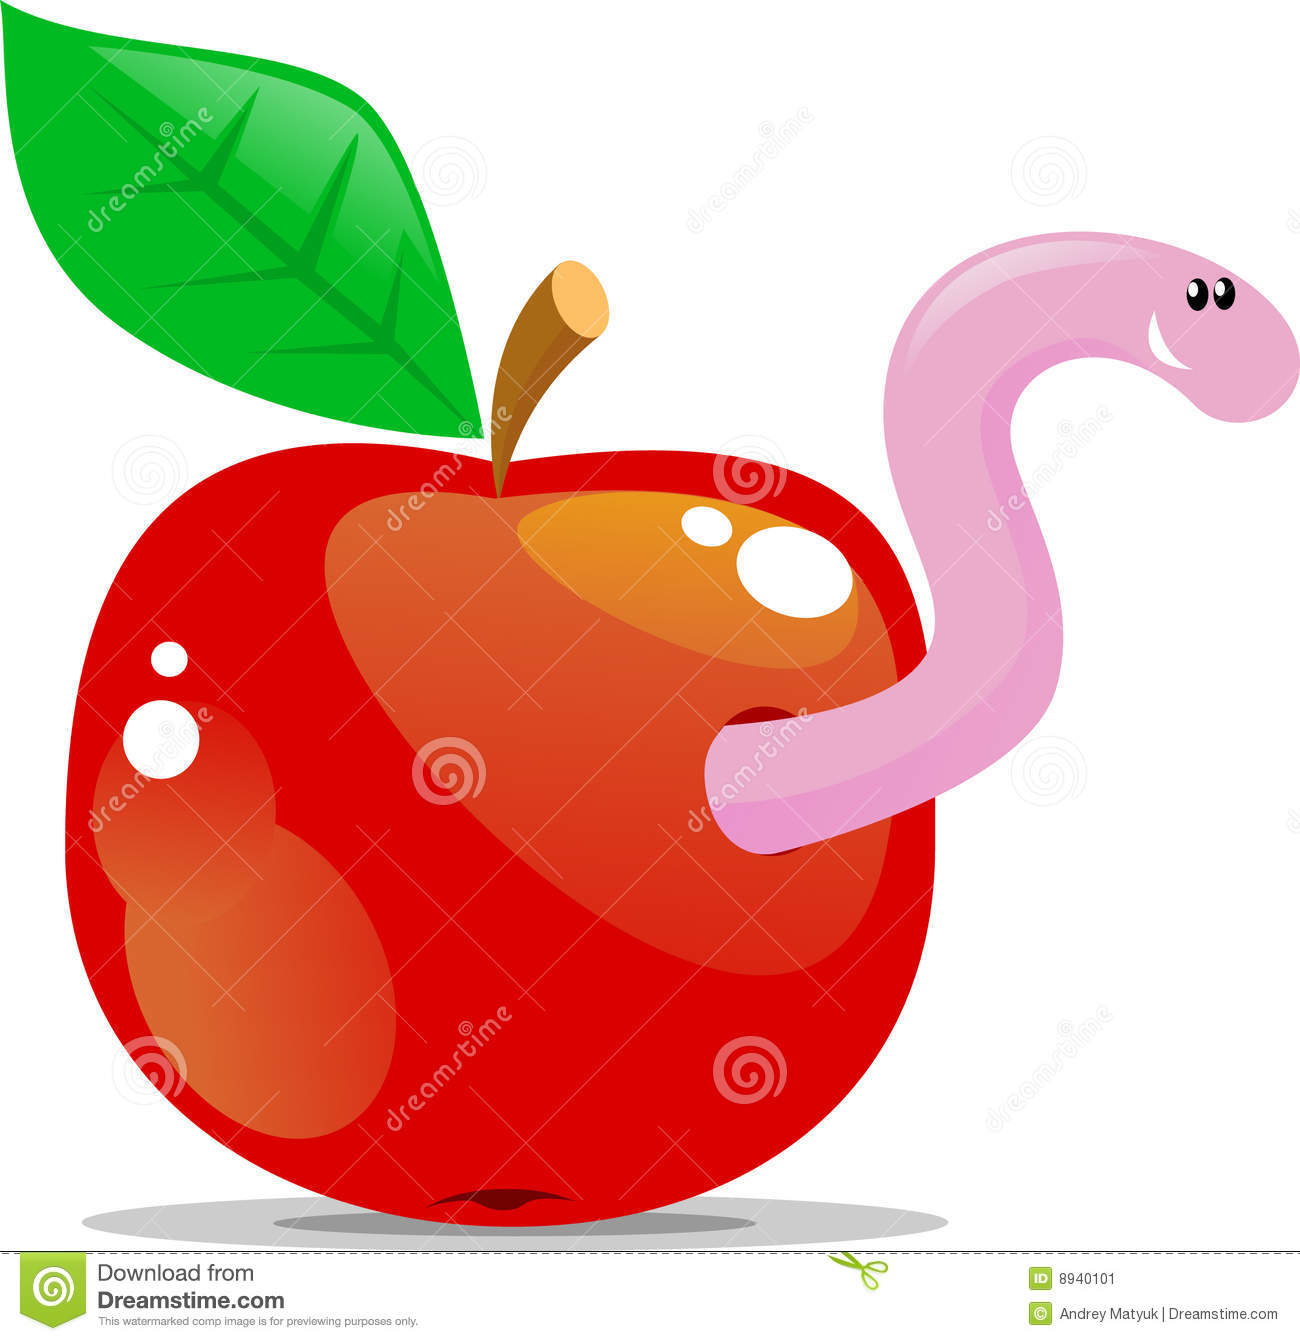 Apple With Worm Stock Image   Image  8940101